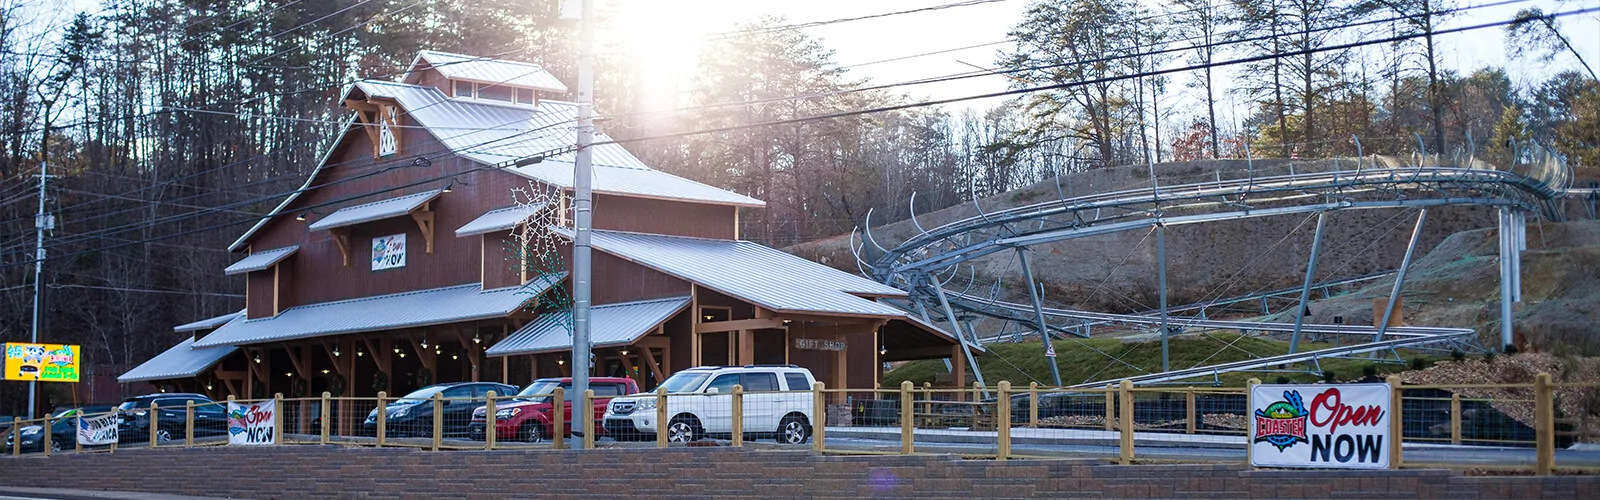 a view from the outside of Rocky Top Mountain Coaster